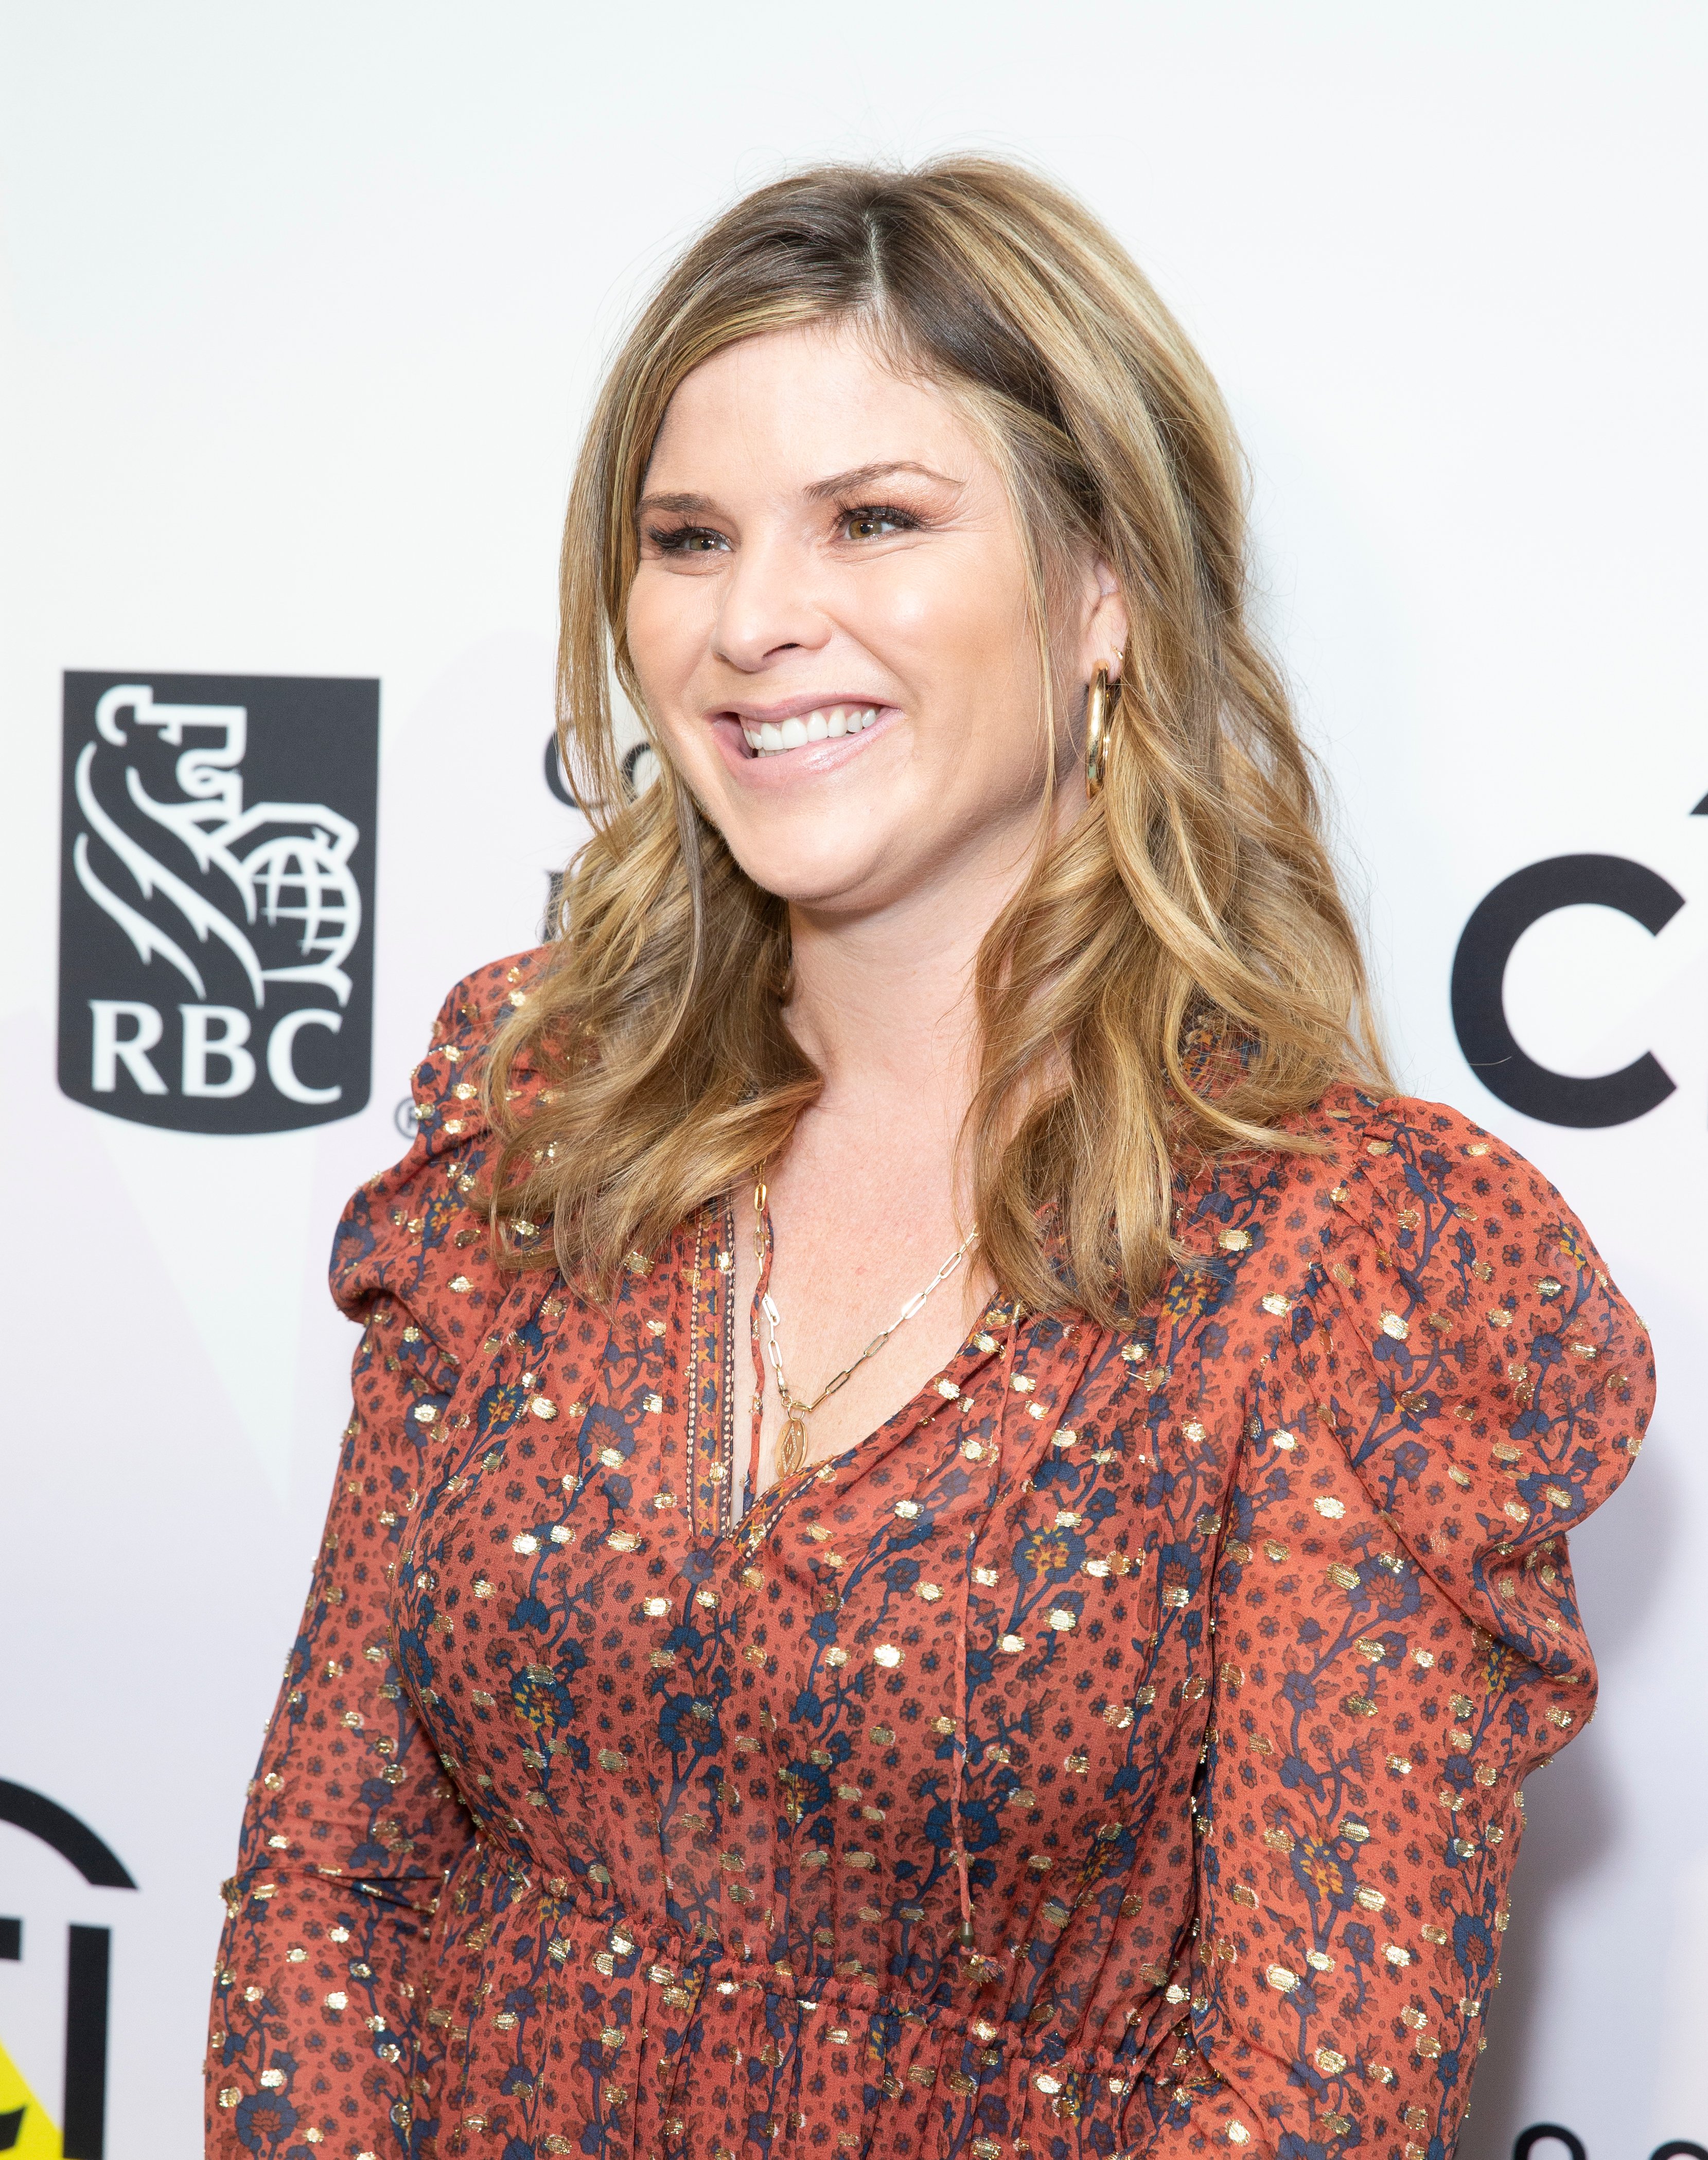 : Jenna Bush Hager attends Hudson River Park Friends Playground Committee in New York, NY | Source: Shutterstock